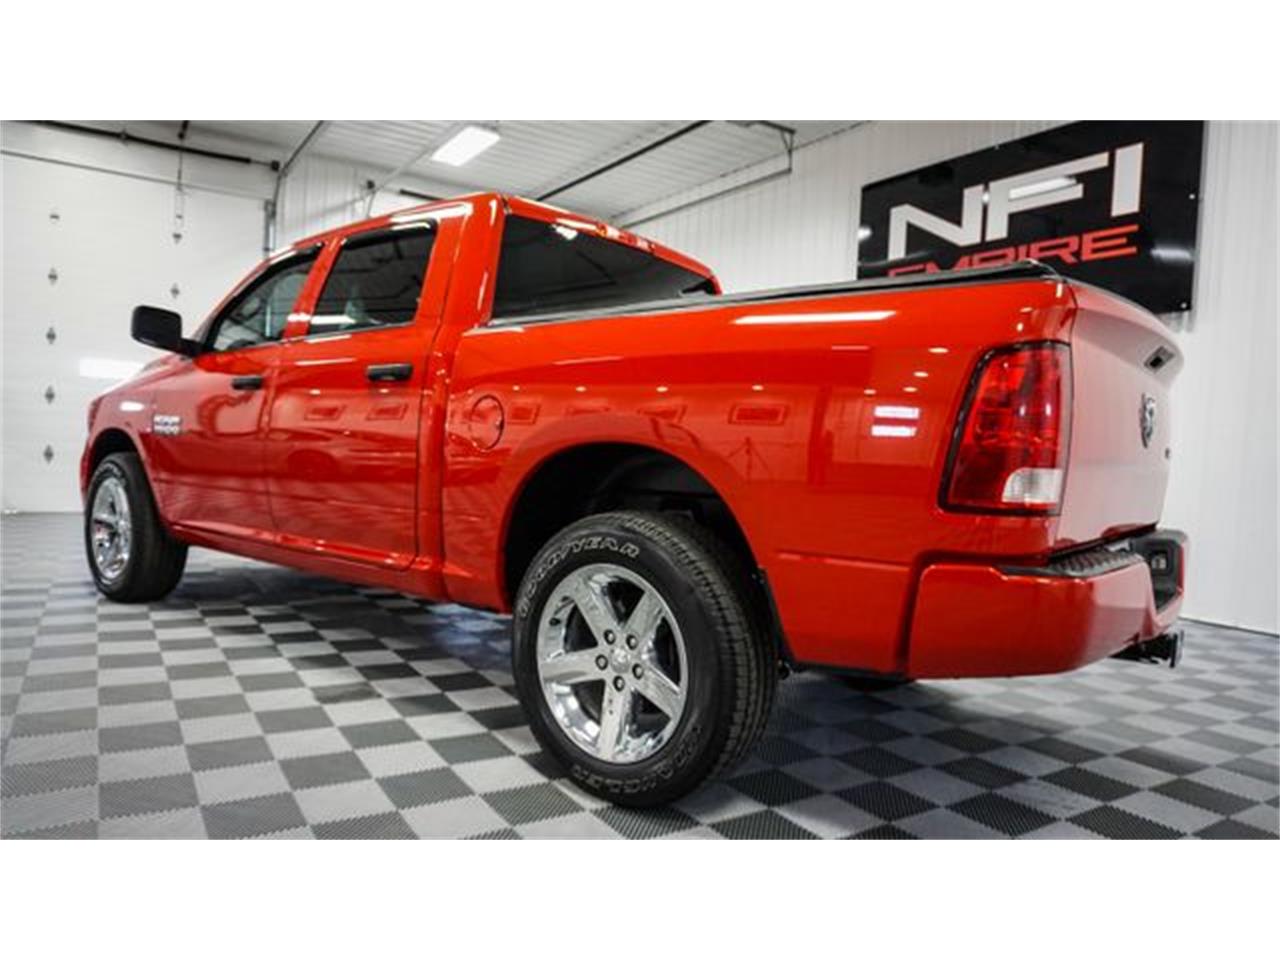 2016 Dodge Ram 1500 for sale in North East, PA – photo 27